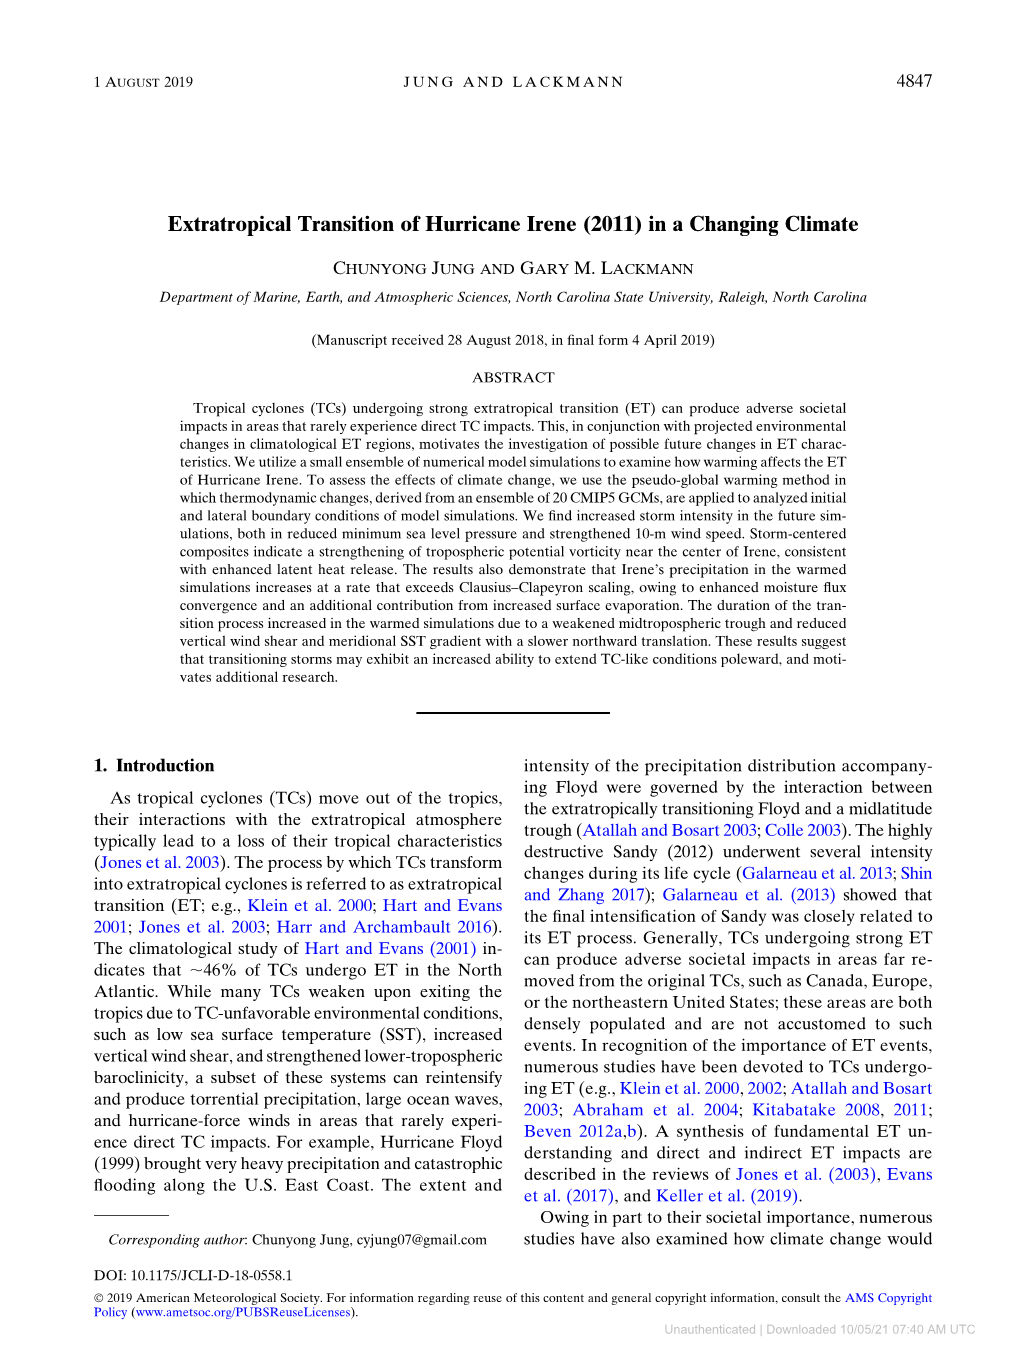 Extratropical Transition of Hurricane Irene (2011) in a Changing Climate